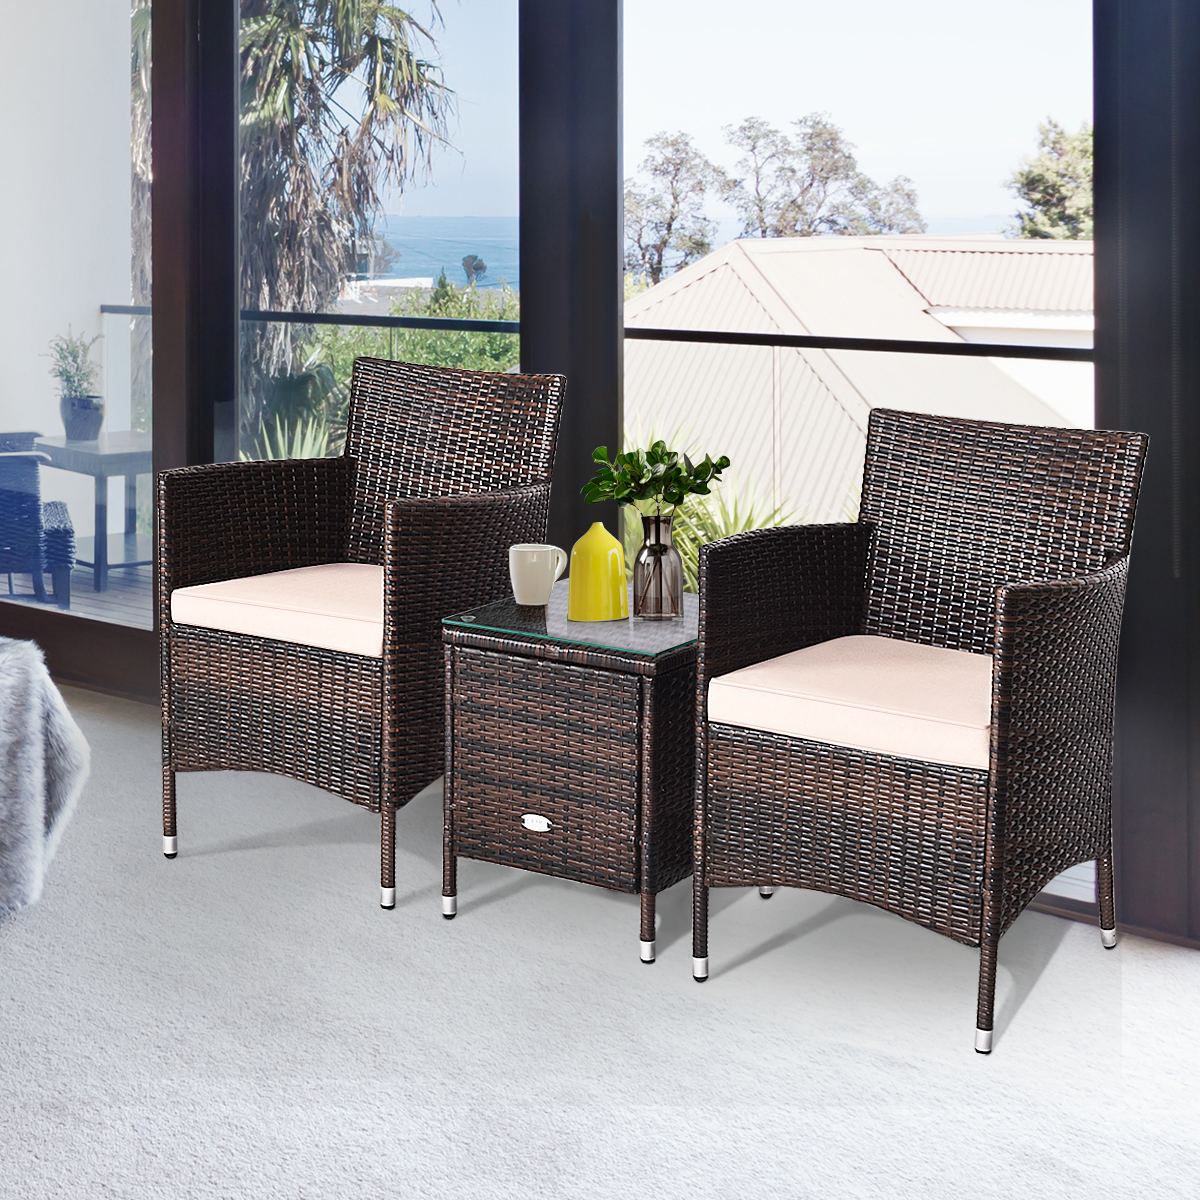 Gymax 3PCS Patio Rattan Chair & Table Furniture Set Outdoor w/ Beige Cushion - image 4 of 10